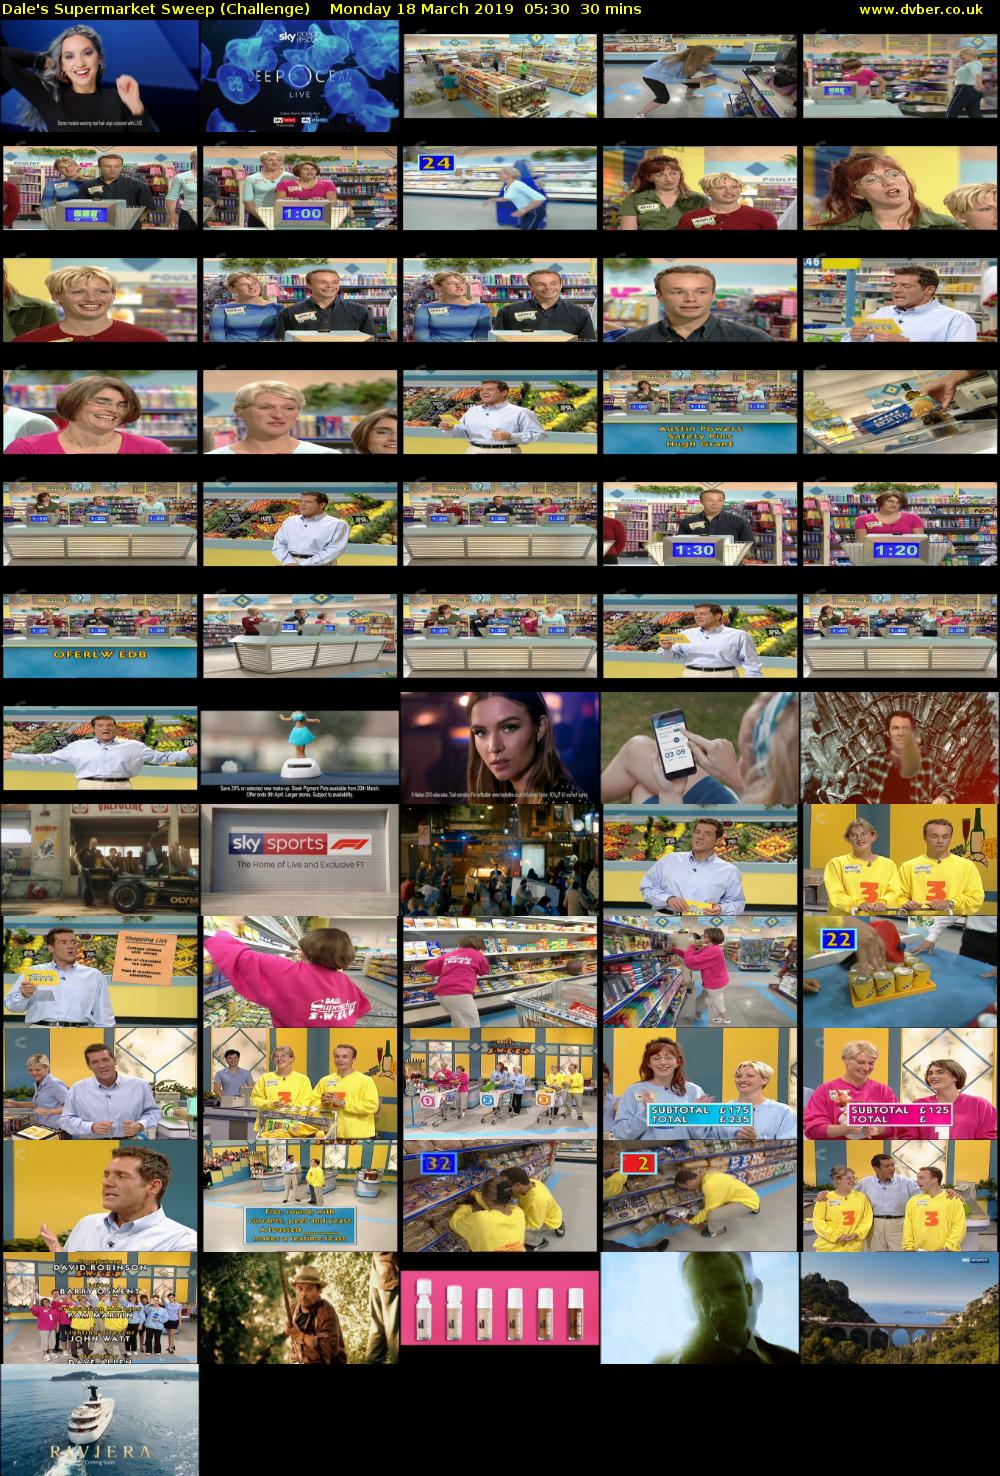 Dale's Supermarket Sweep (Challenge) Monday 18 March 2019 05:30 - 06:00